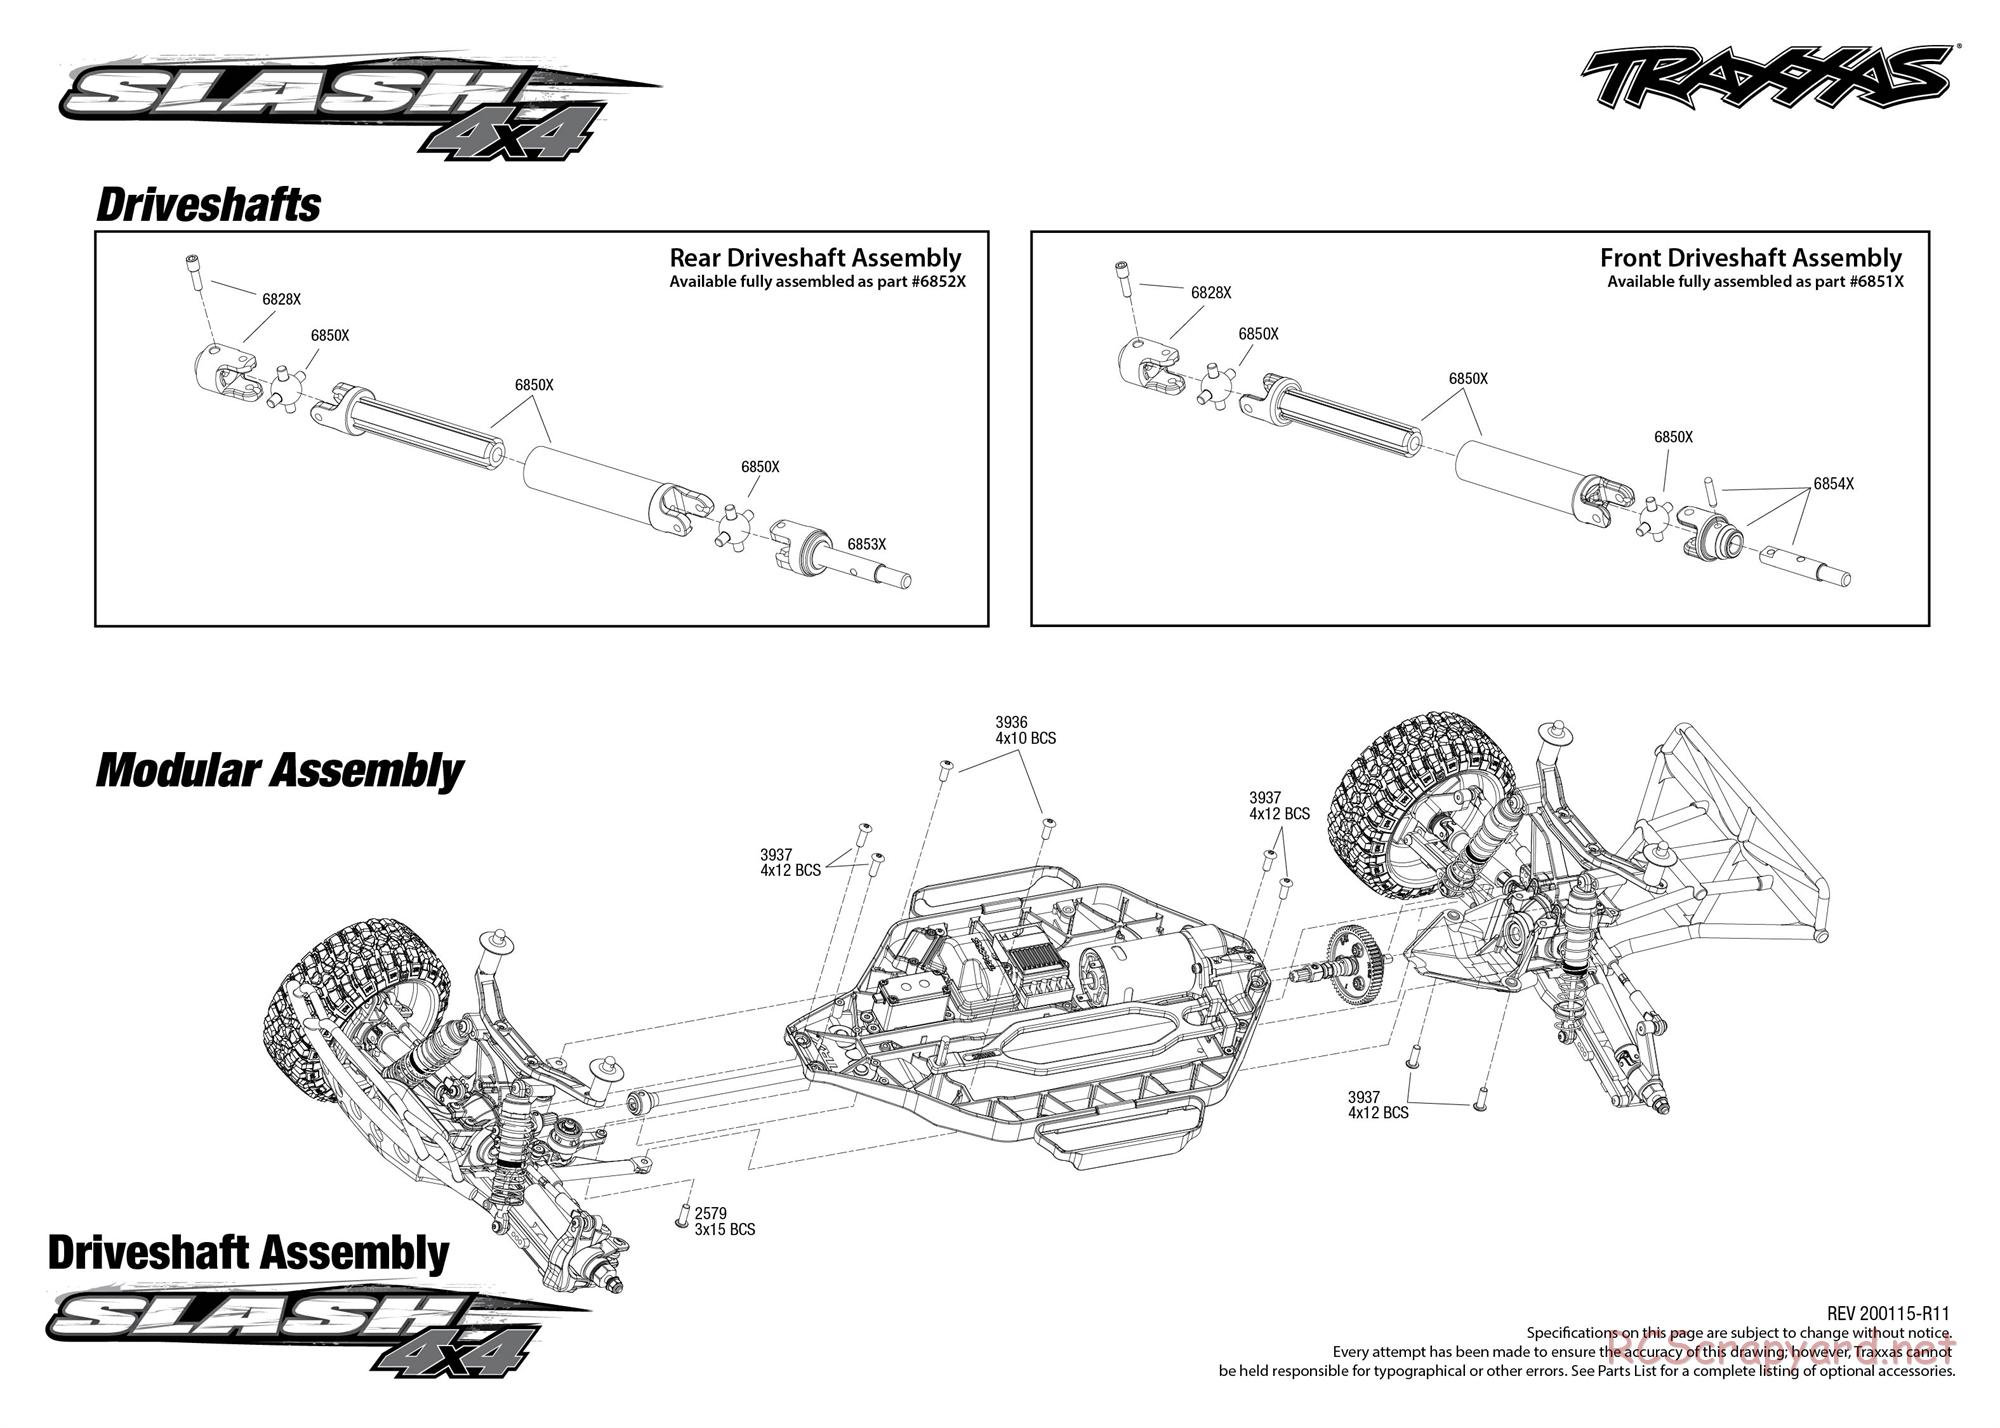 Traxxas - Slash 4x4 Brushed (2018) - Exploded Views - Page 2